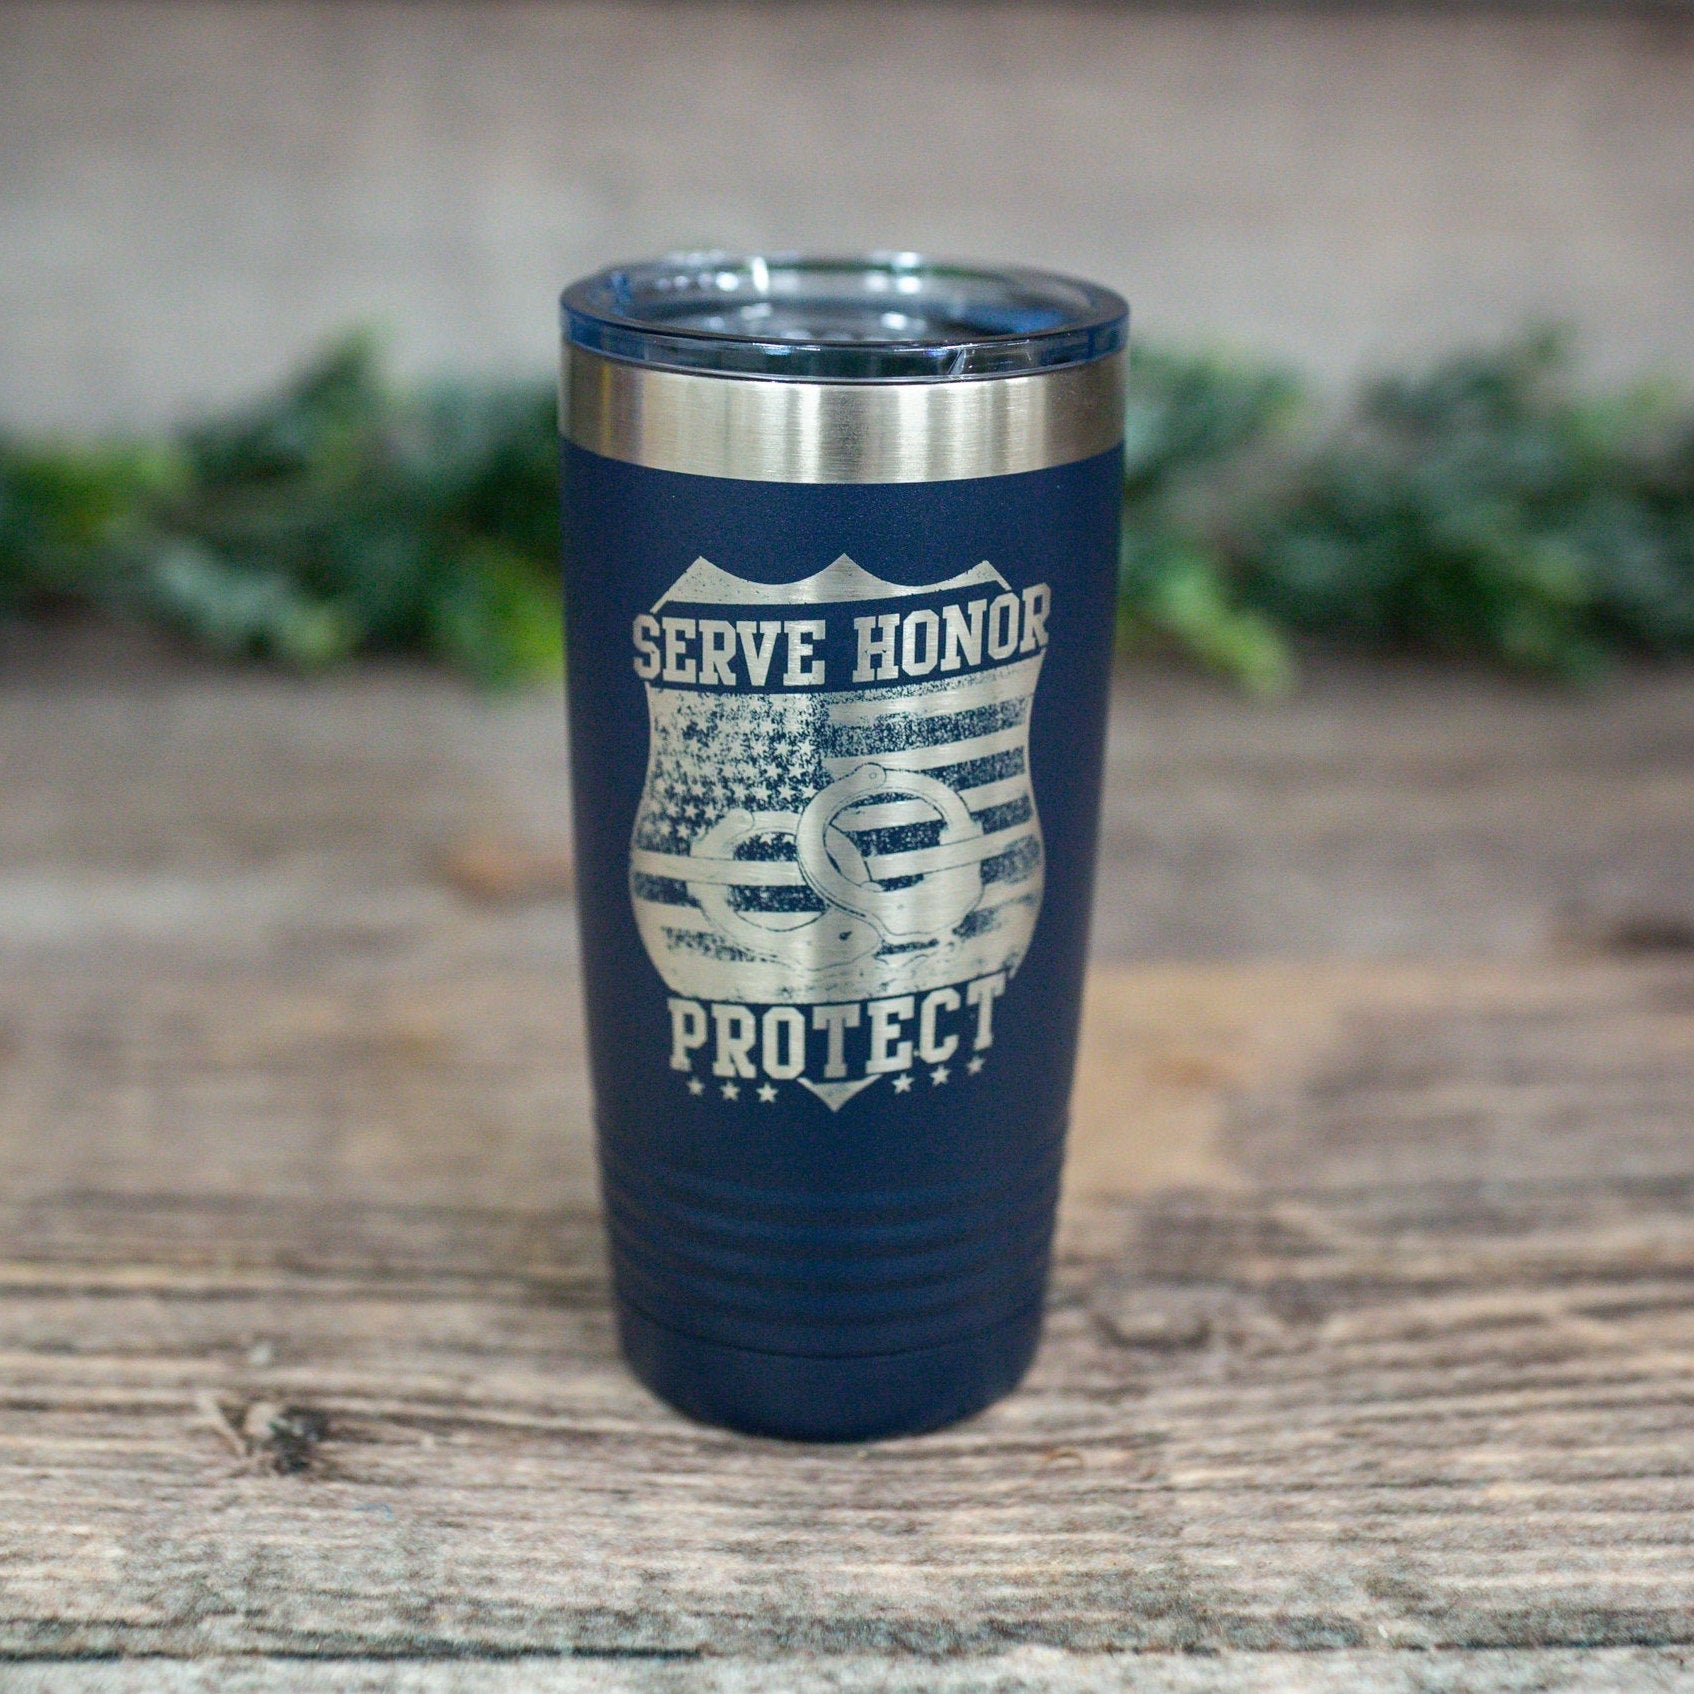 Police Officer's Personalized Travel Coffee Mug with Handle